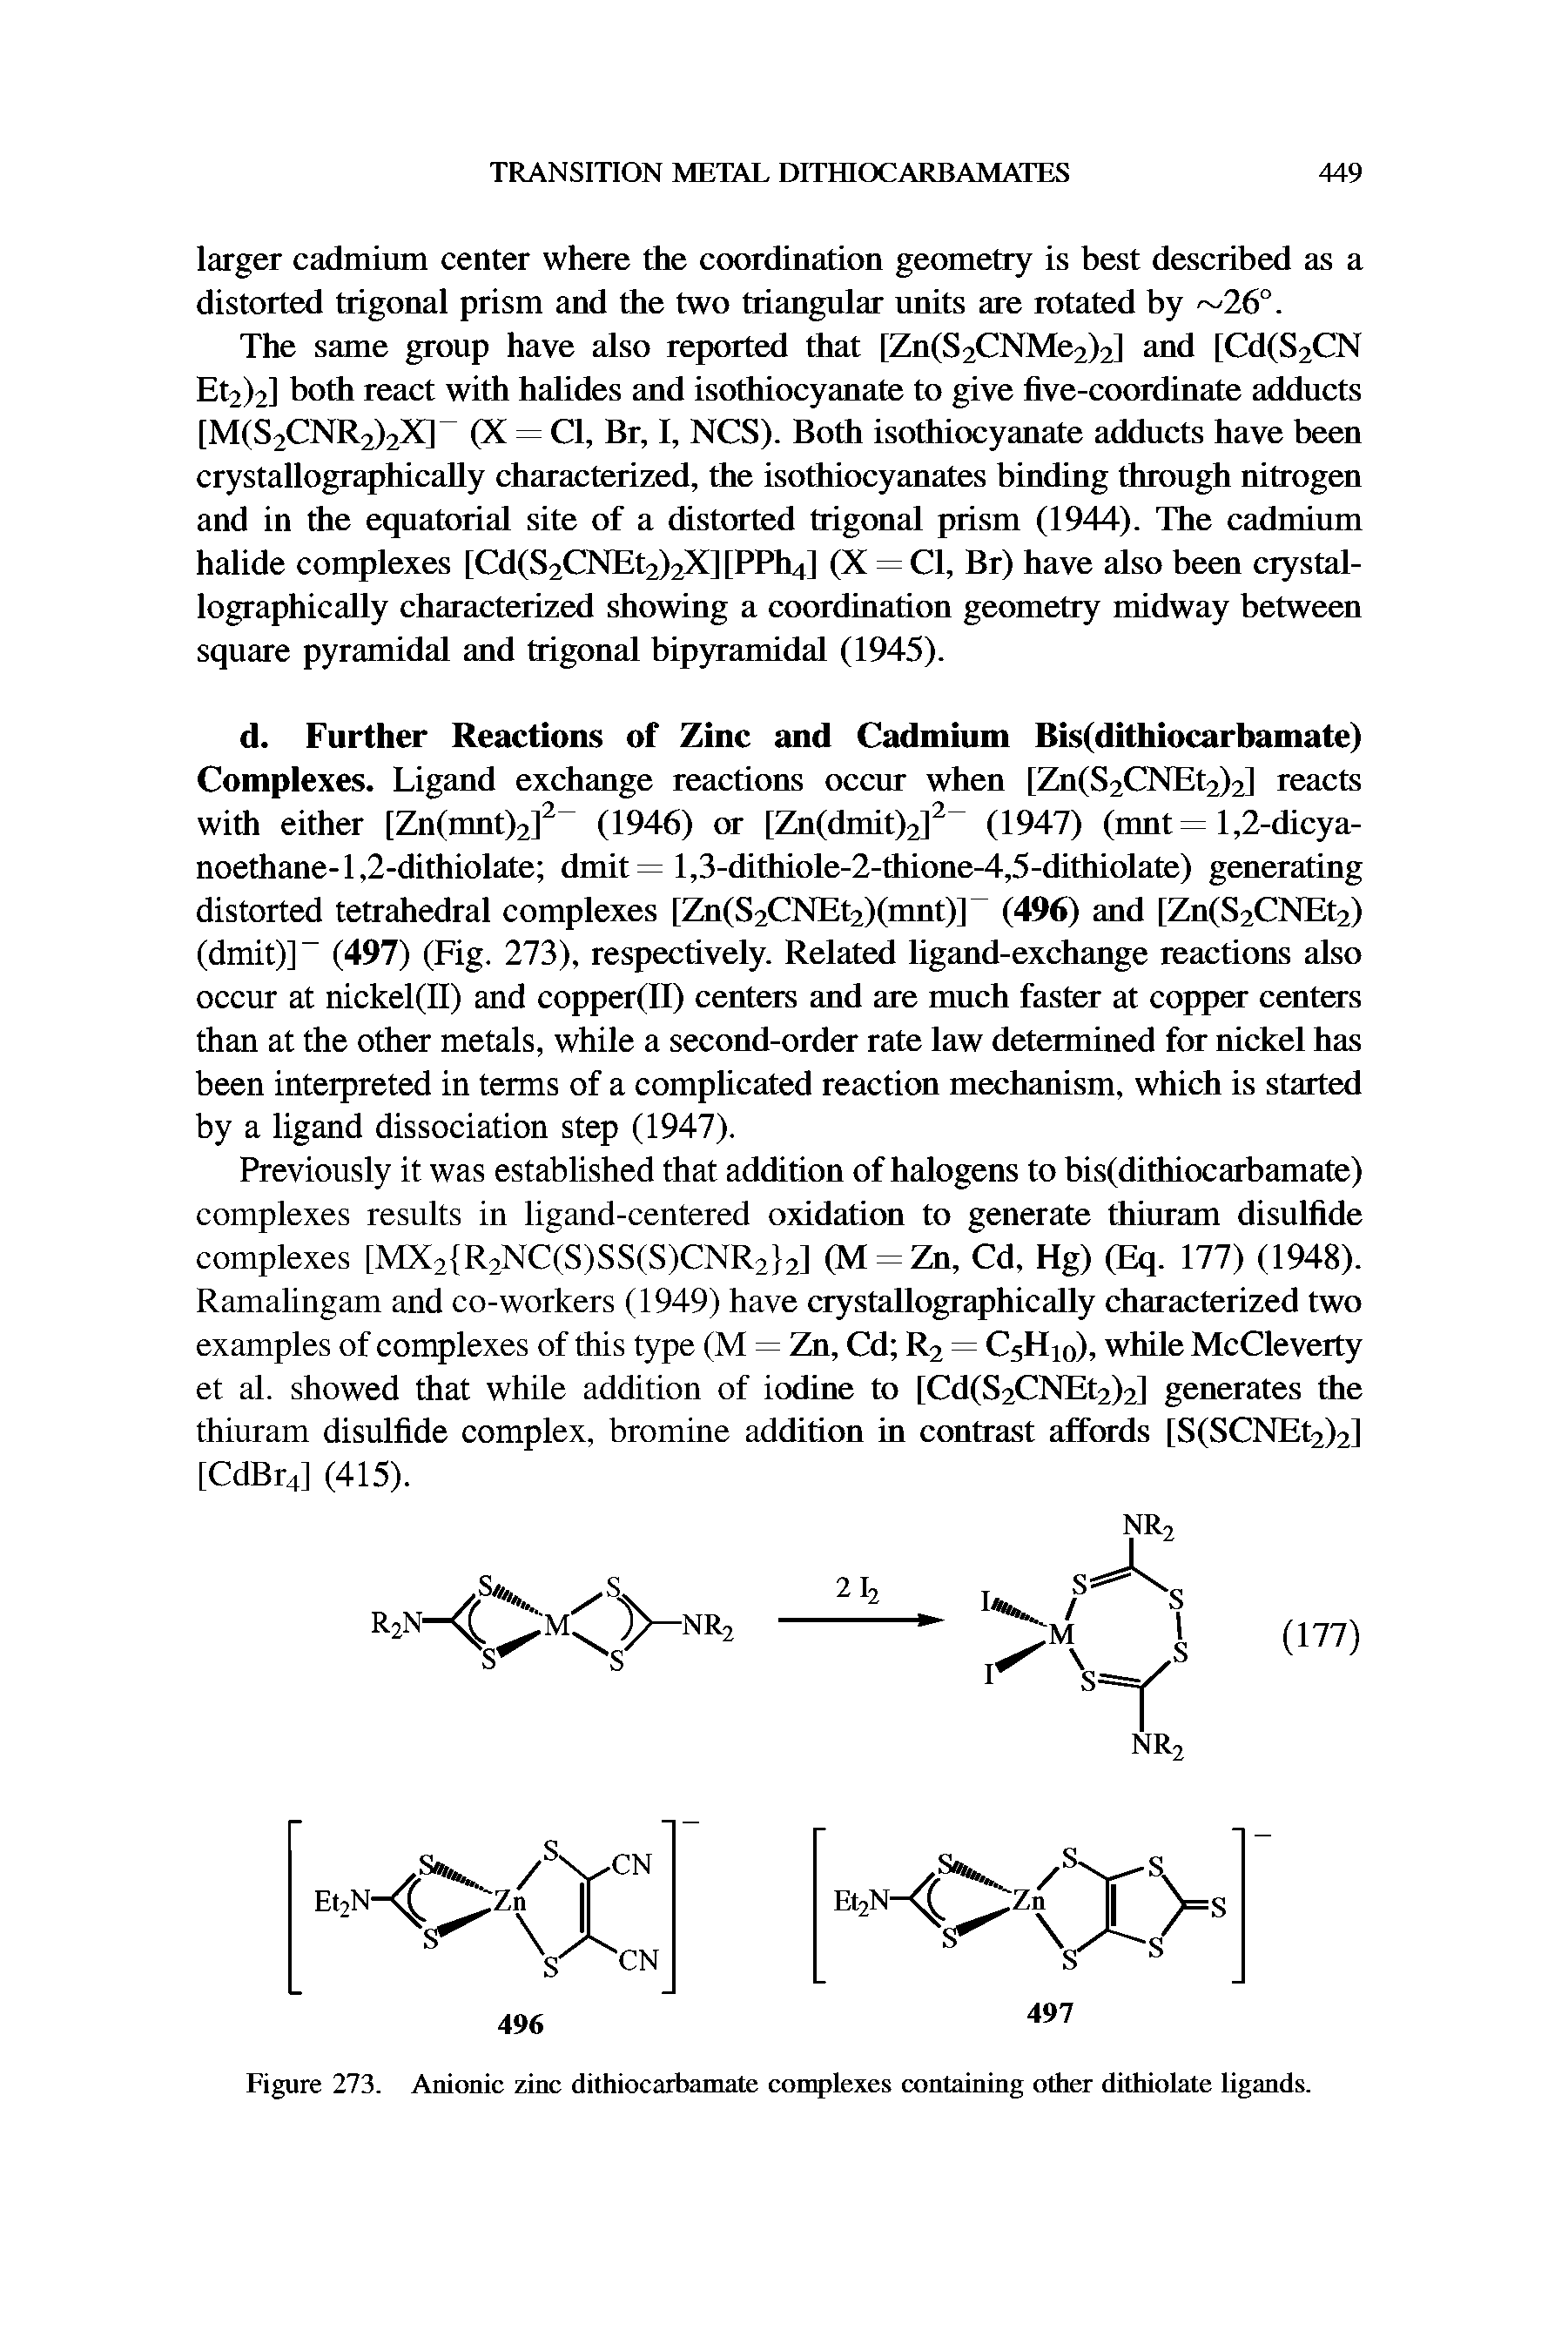 Figure 273 Anionic zinc dithiocarbamate complexes containing other dithiolate ligands.